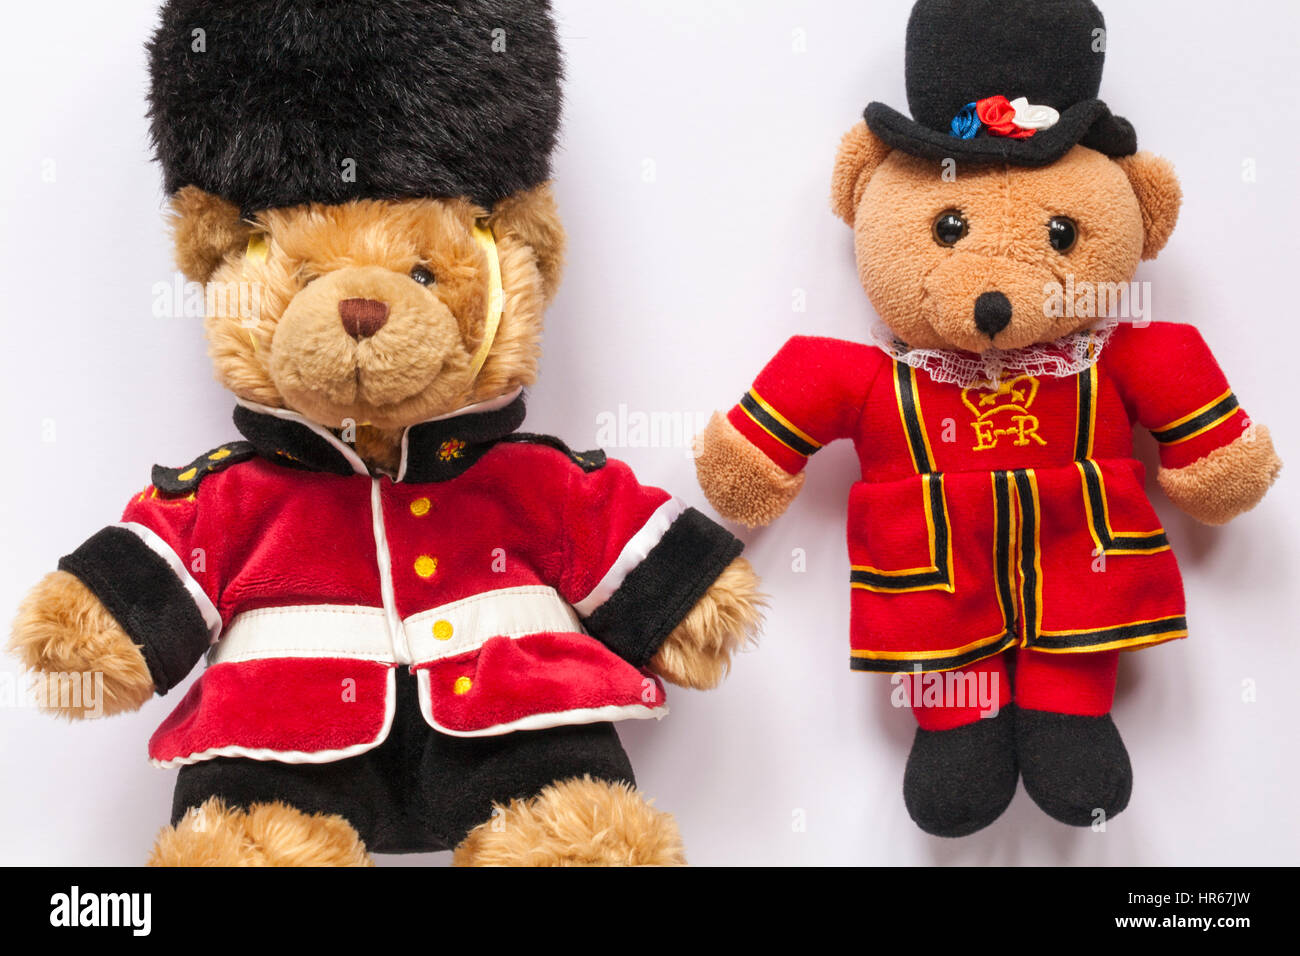 Buckingham Palace beefeater soldier guards, beefeater Yeoman of the Guard, Teddy bears soft cuddly toys set on white background Stock Photo